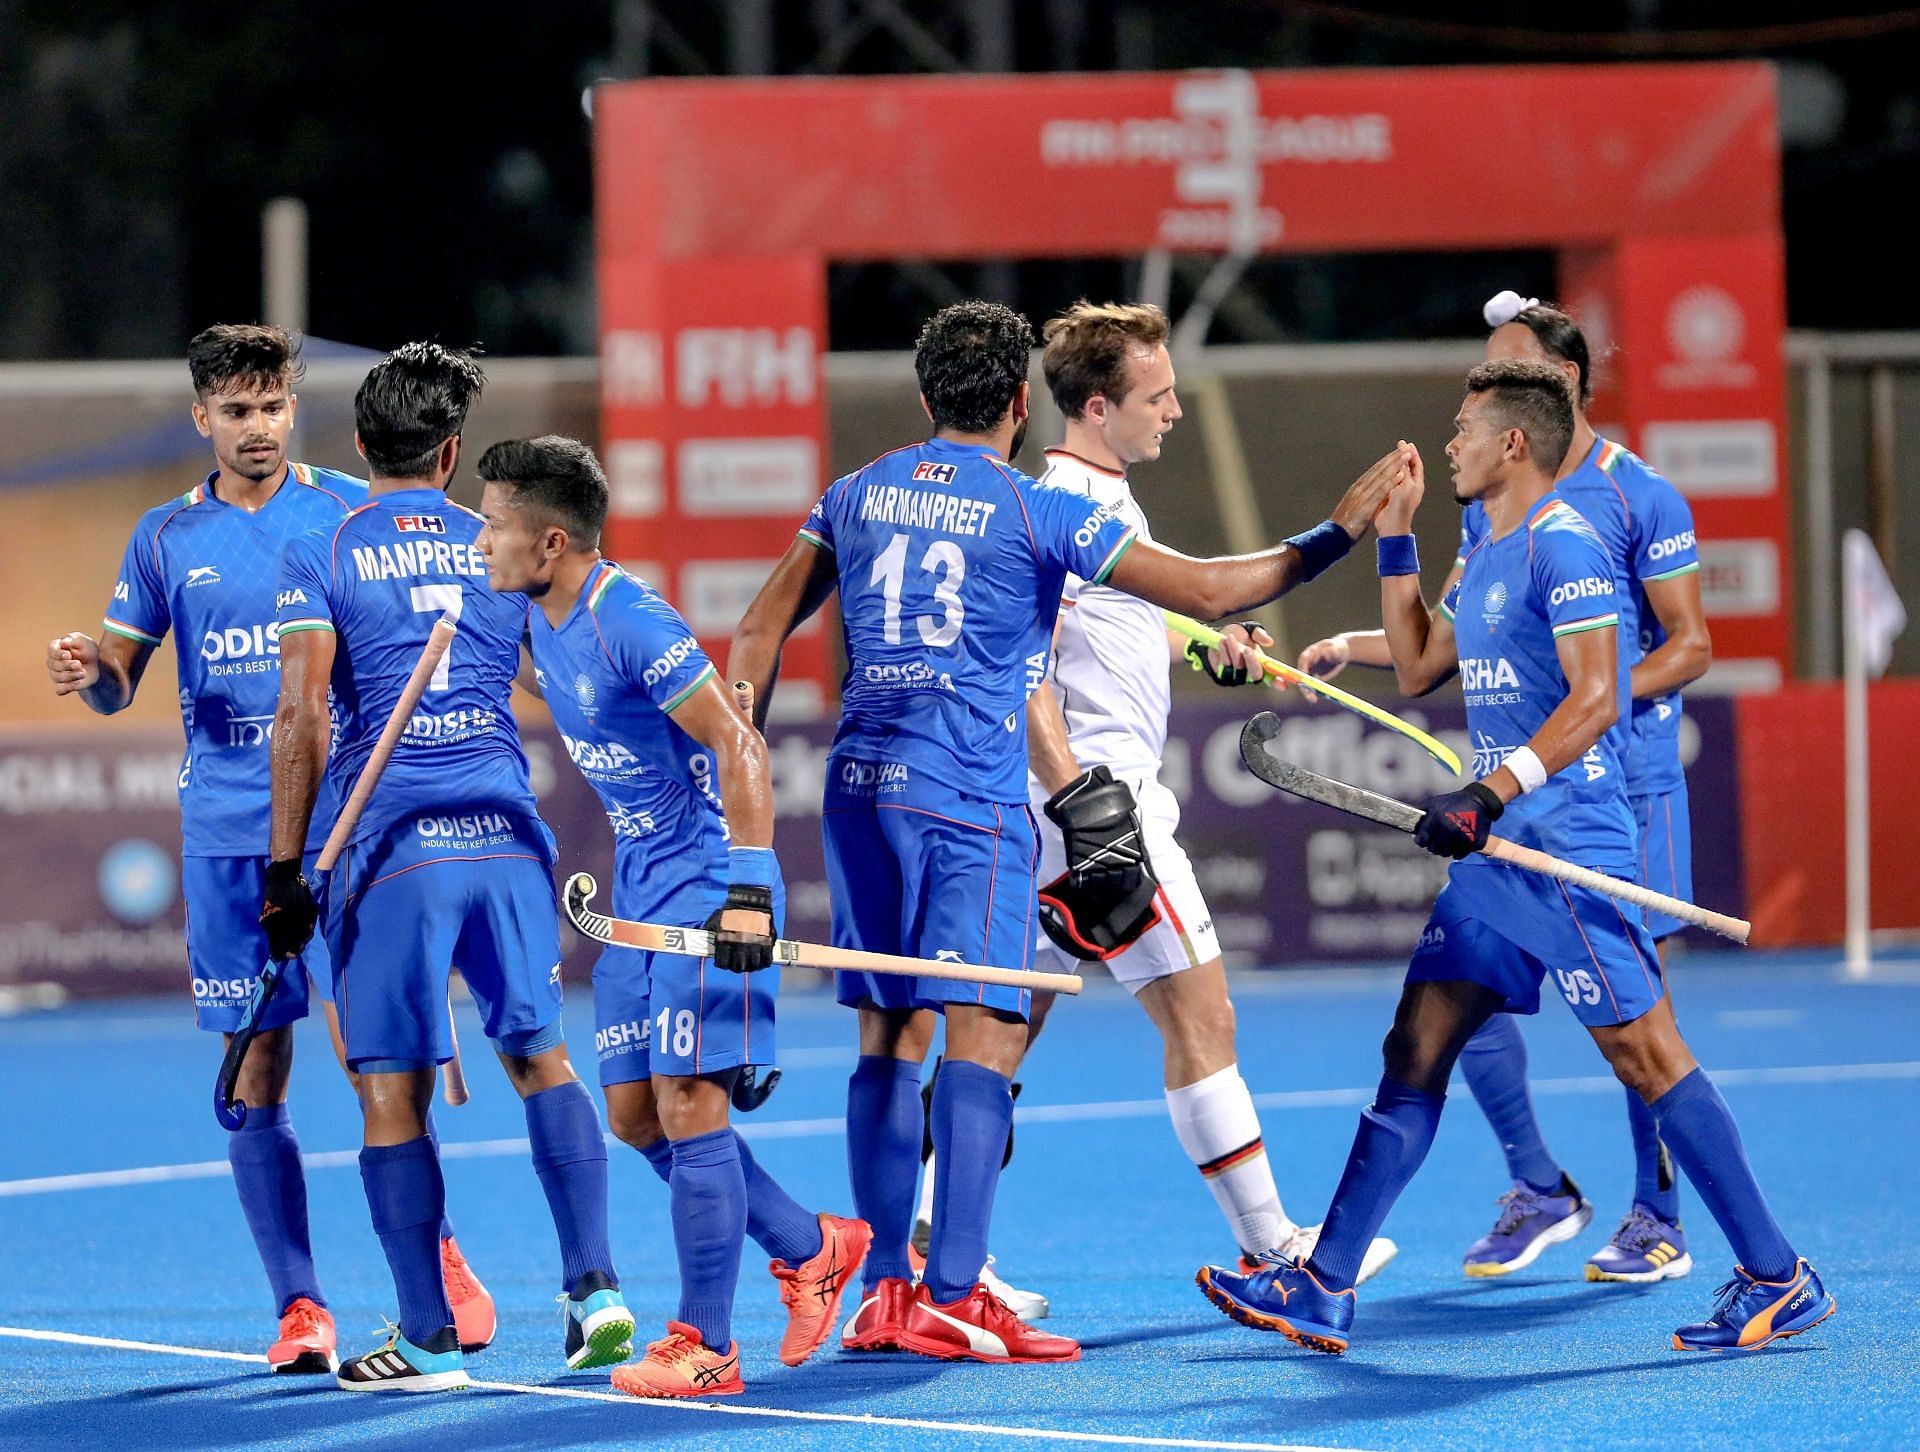 Indian players celebrate a goal against Germany in their FIH Pro League match. (PC: Hockey India)